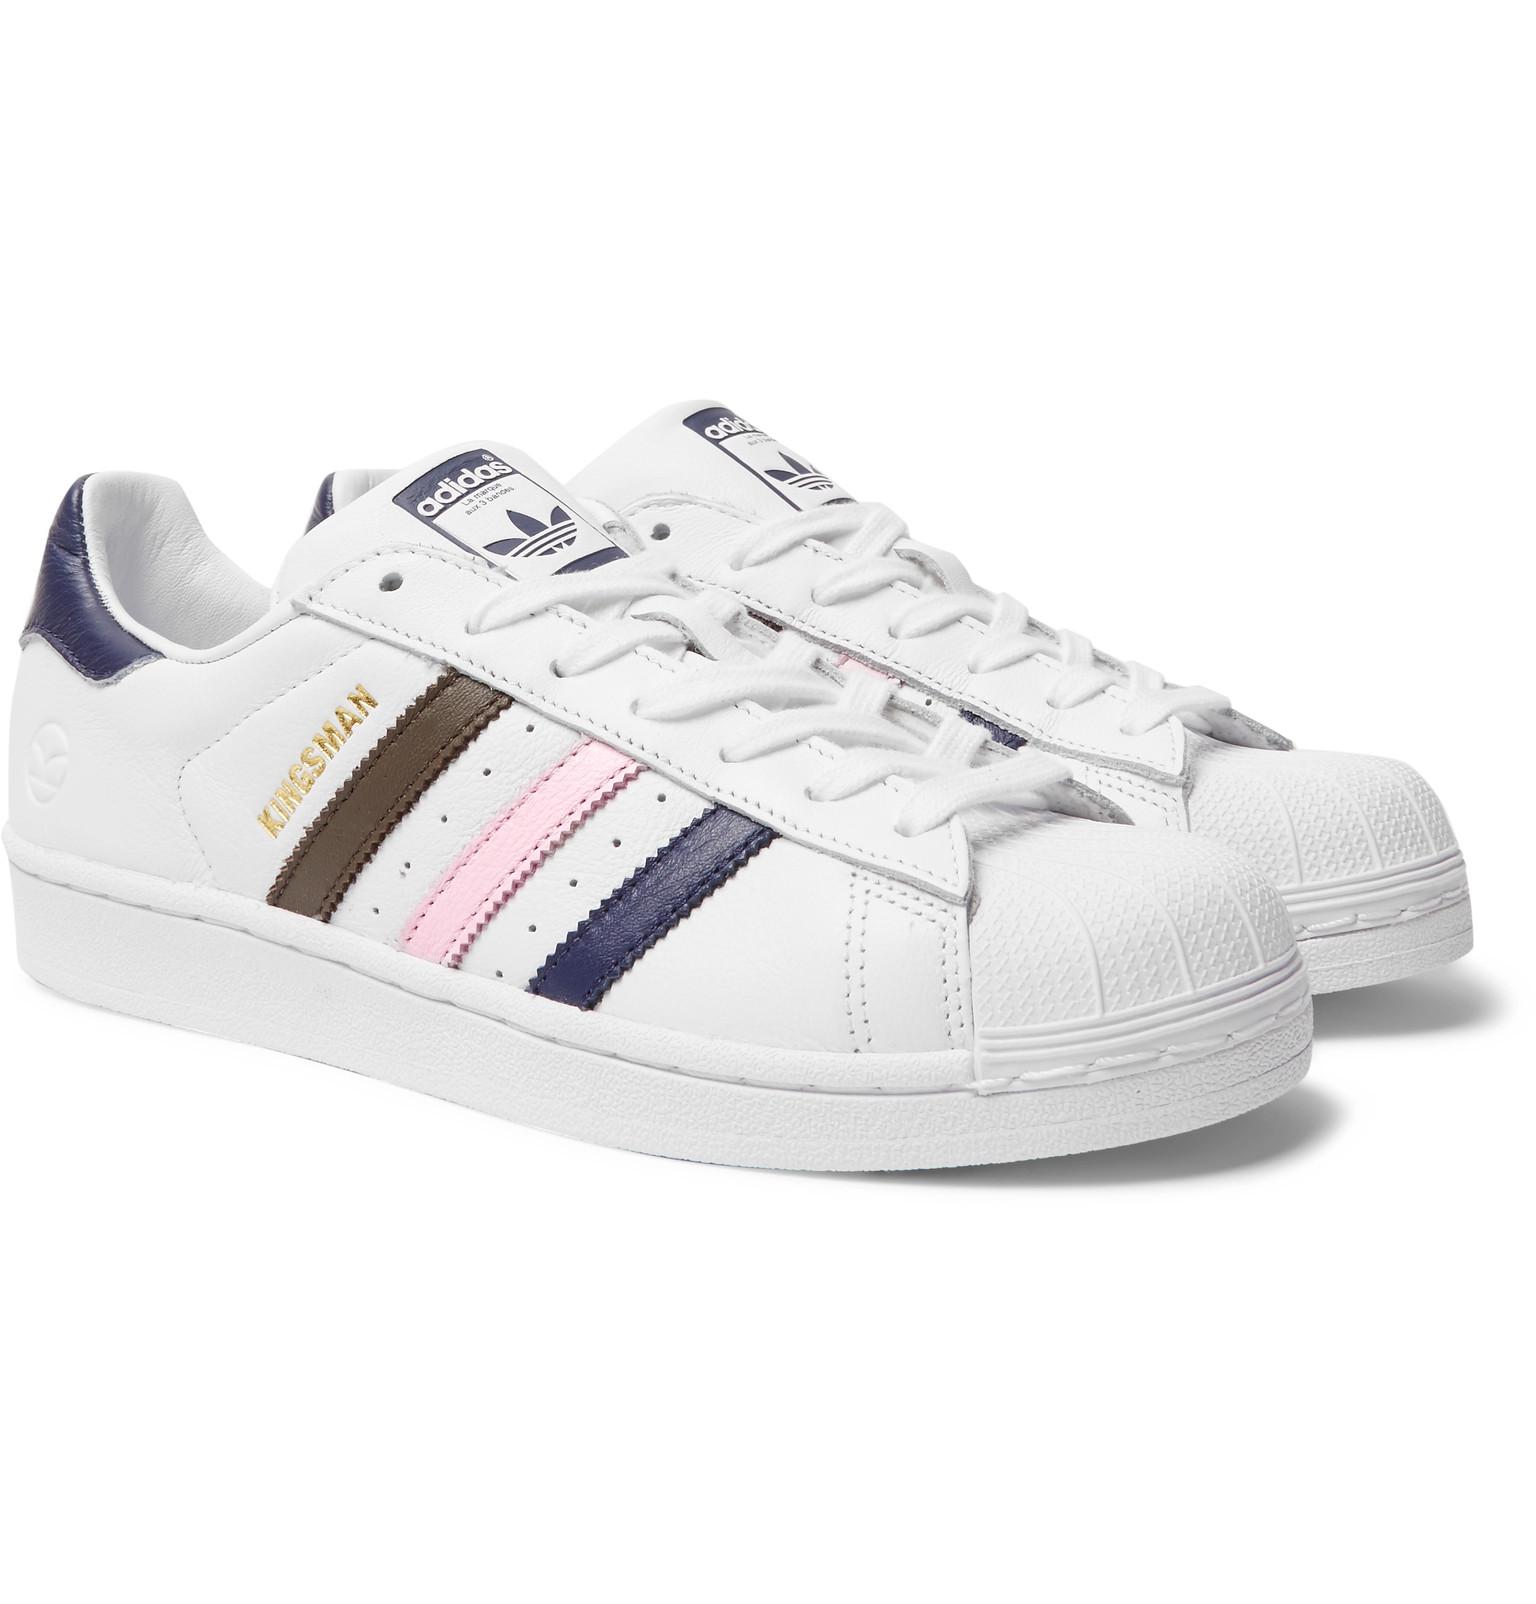 Kingsman Adidas Originals Superstar Numbered Leather Sneakers in White ...